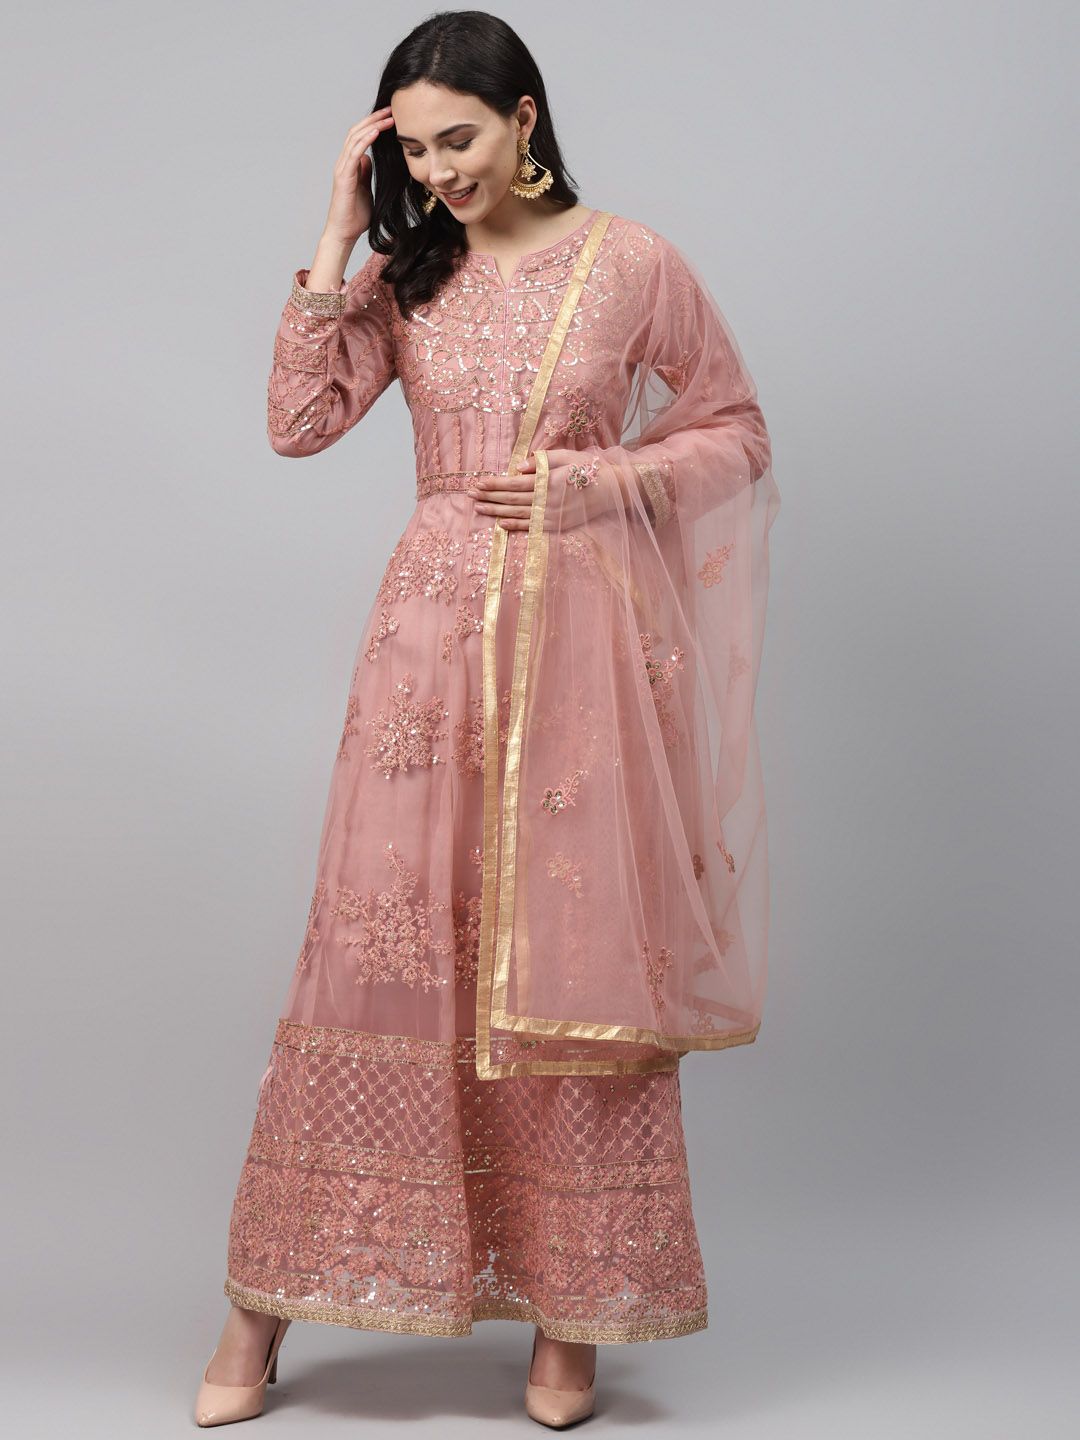 Readiprint Fashions Peach-Coloured & Golden Net Semi-Stitched Dress Material Price in India